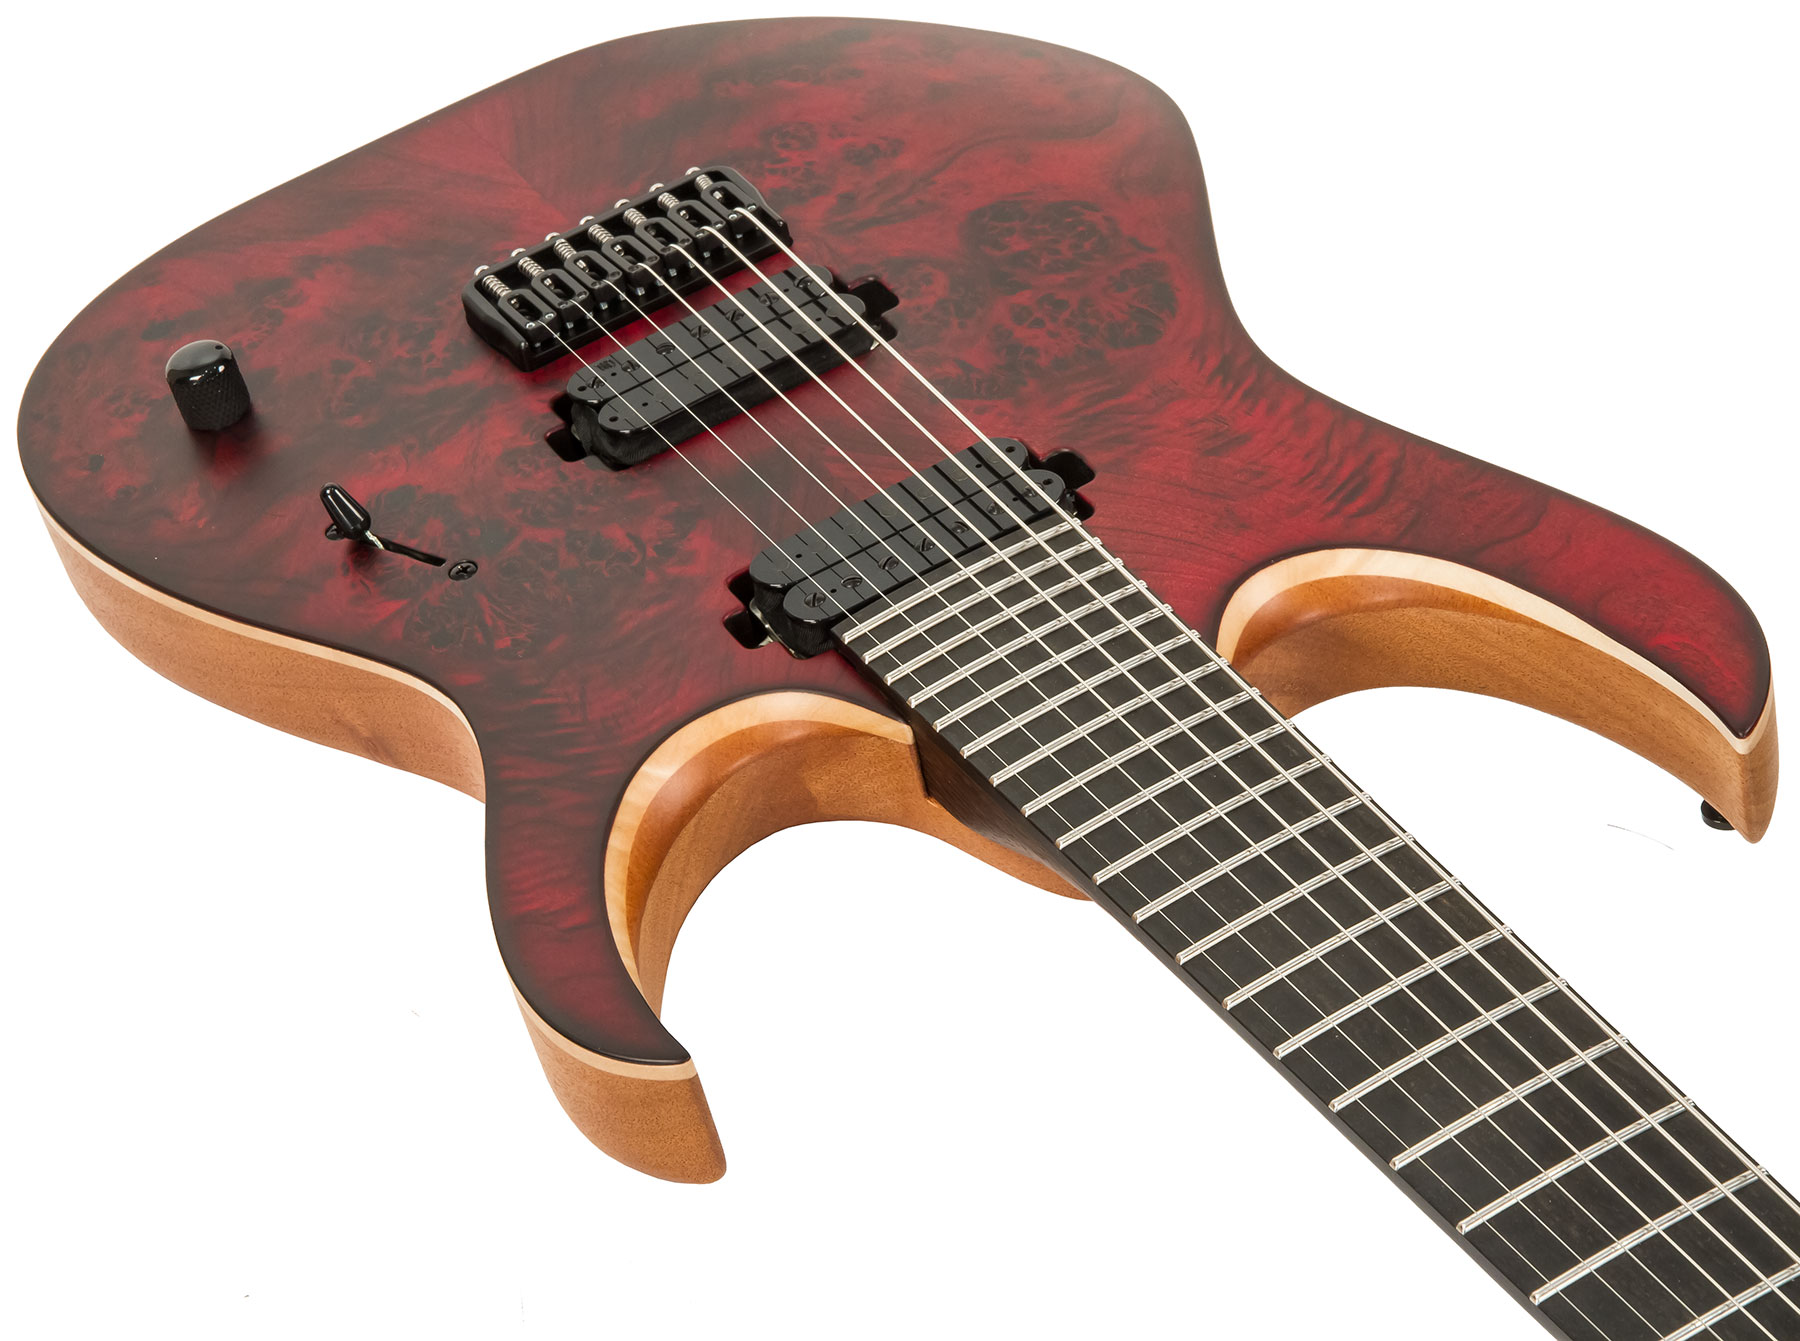 Mayones Guitars Duvell Elite 7 Hh Tko Ht Eb - Dirty Red Satin - 7 string electric guitar - Variation 3